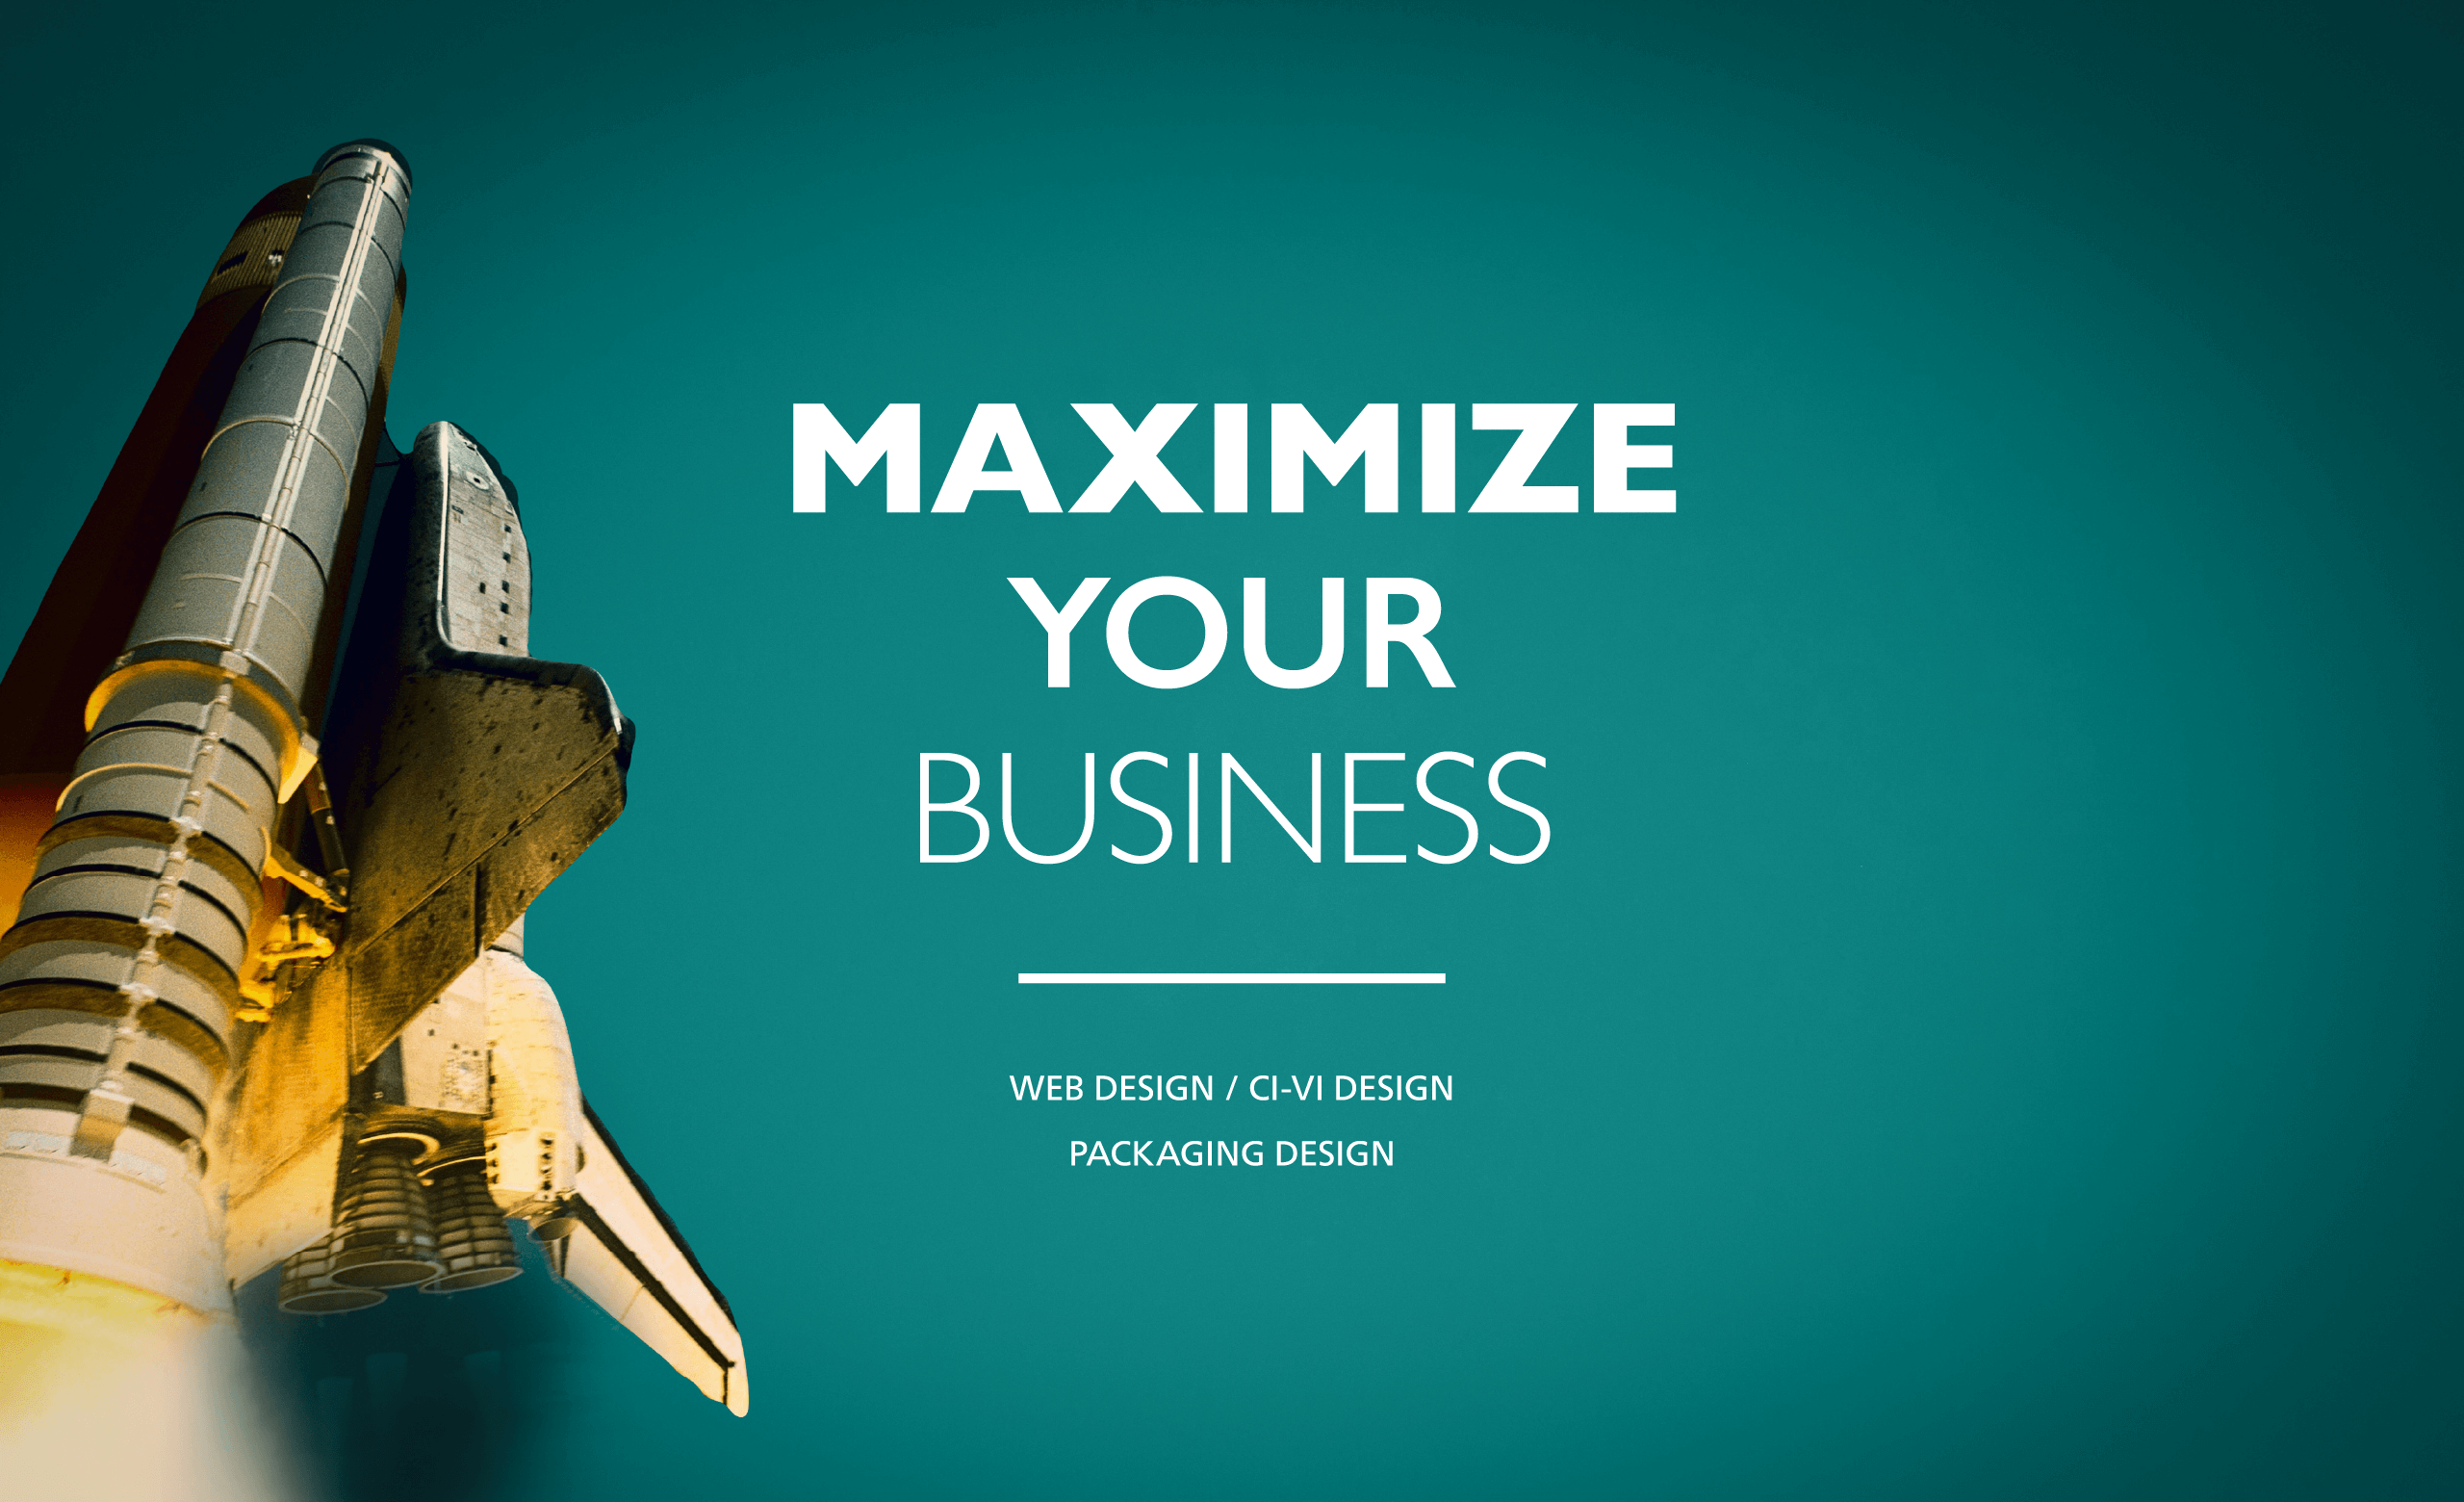 MAXIMIZE YOUR BUSINESS